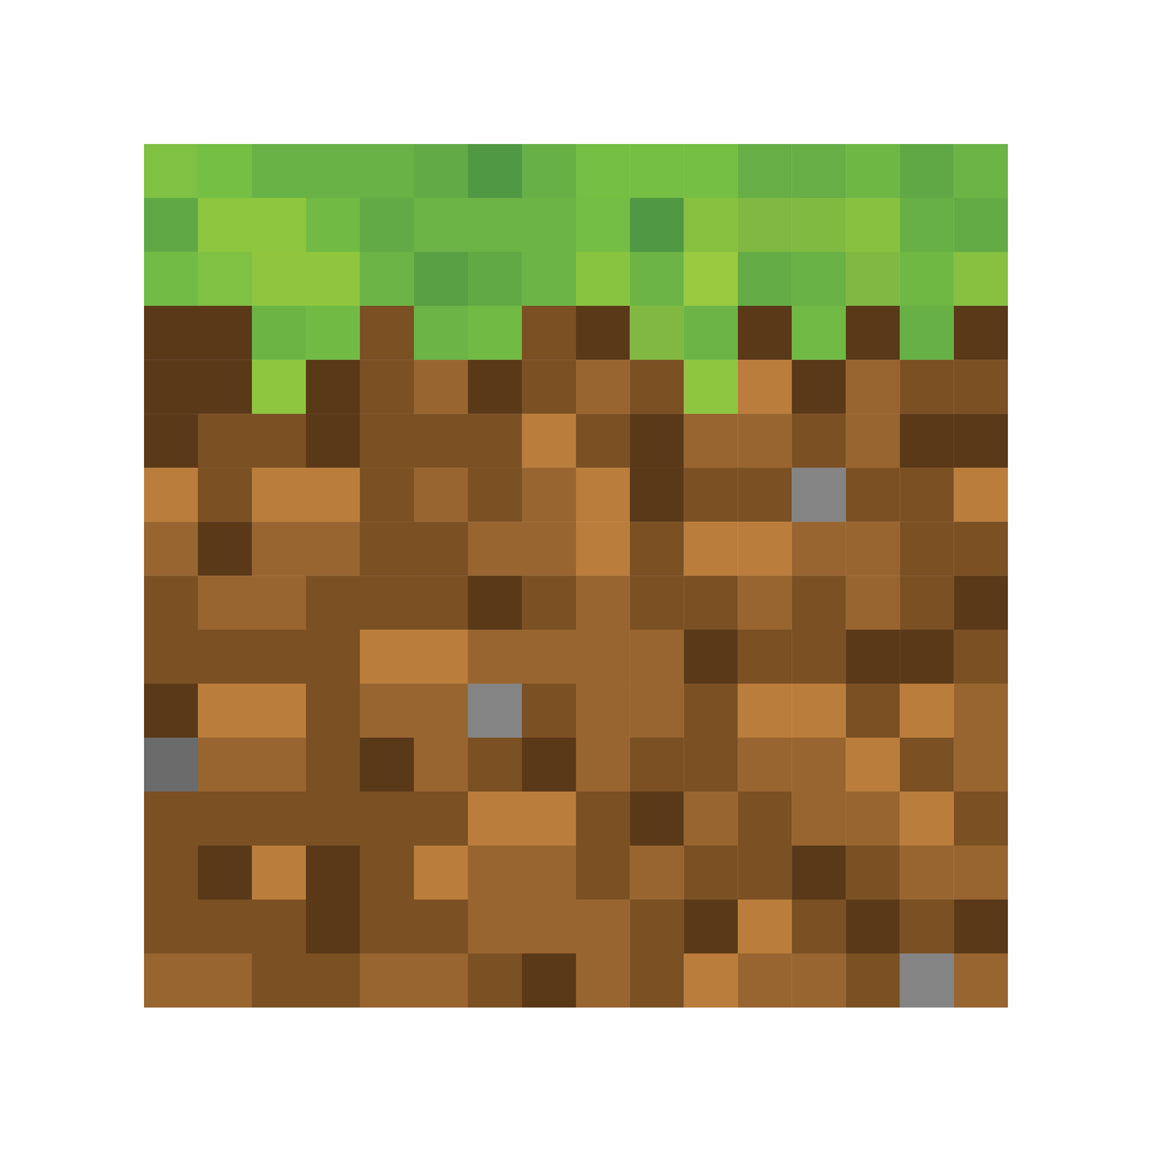 Mine Themed Block - Grass and Dirt 12" x 12" - Wall Decal